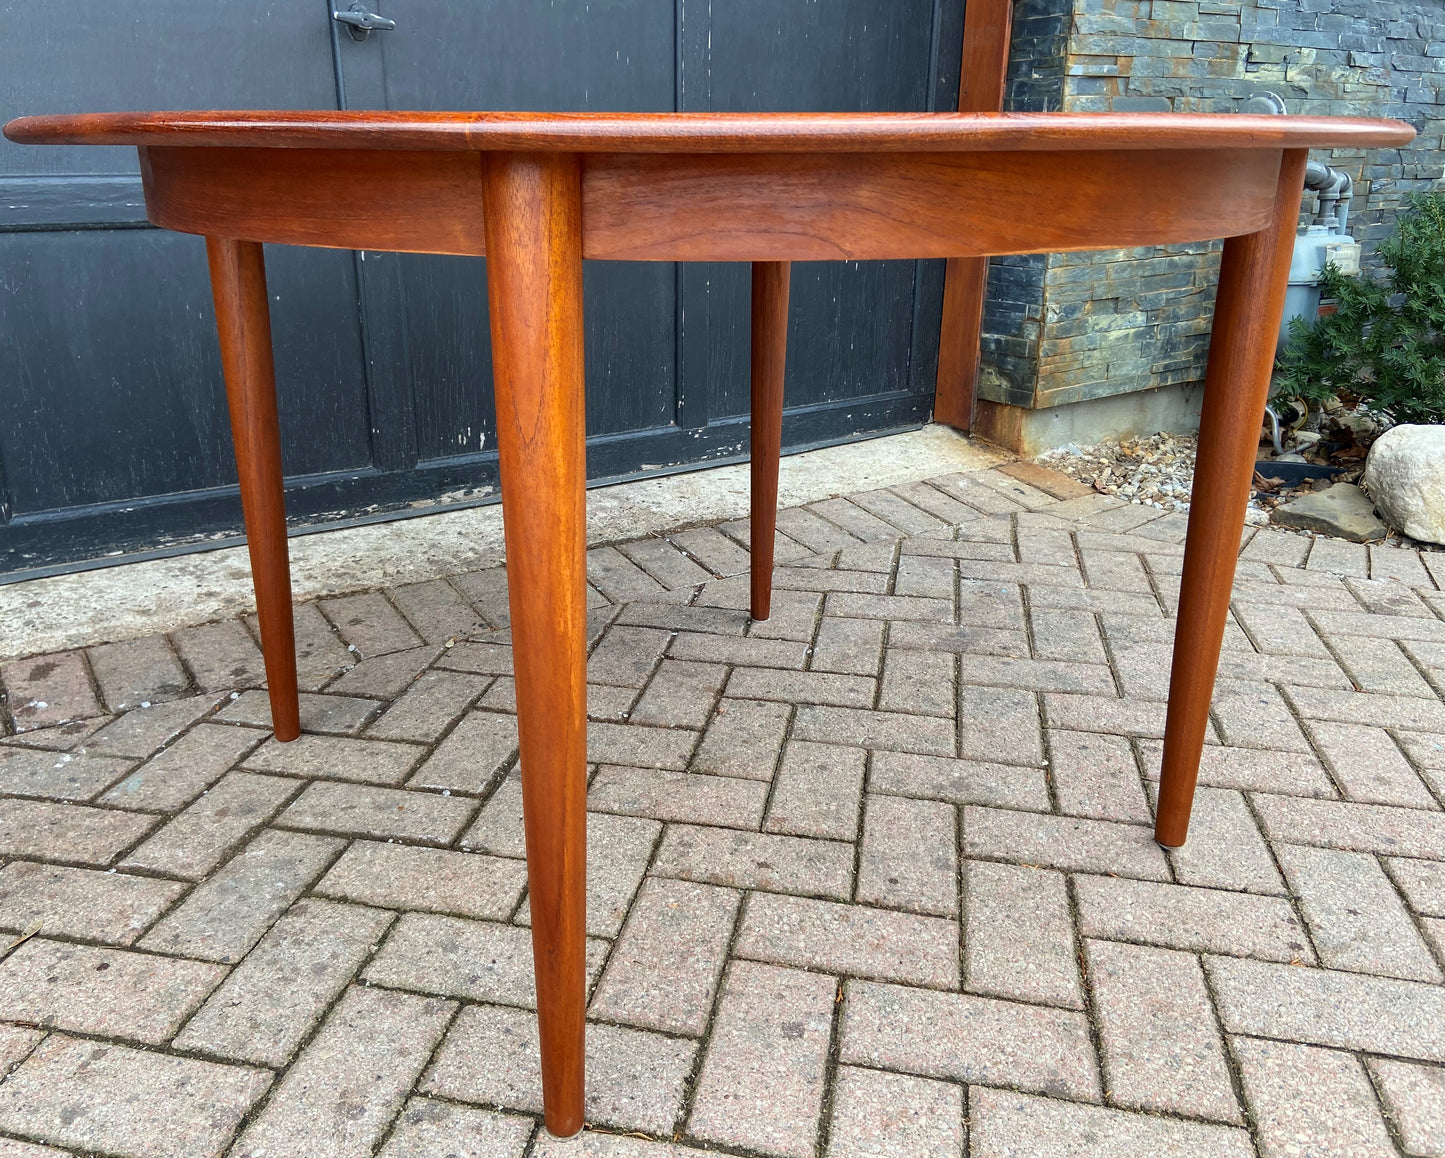 REFINISHED Danish MCM Teak Table Round with 2 Leaves by Skovmand and Andersen for Moreddi, 47"-86"